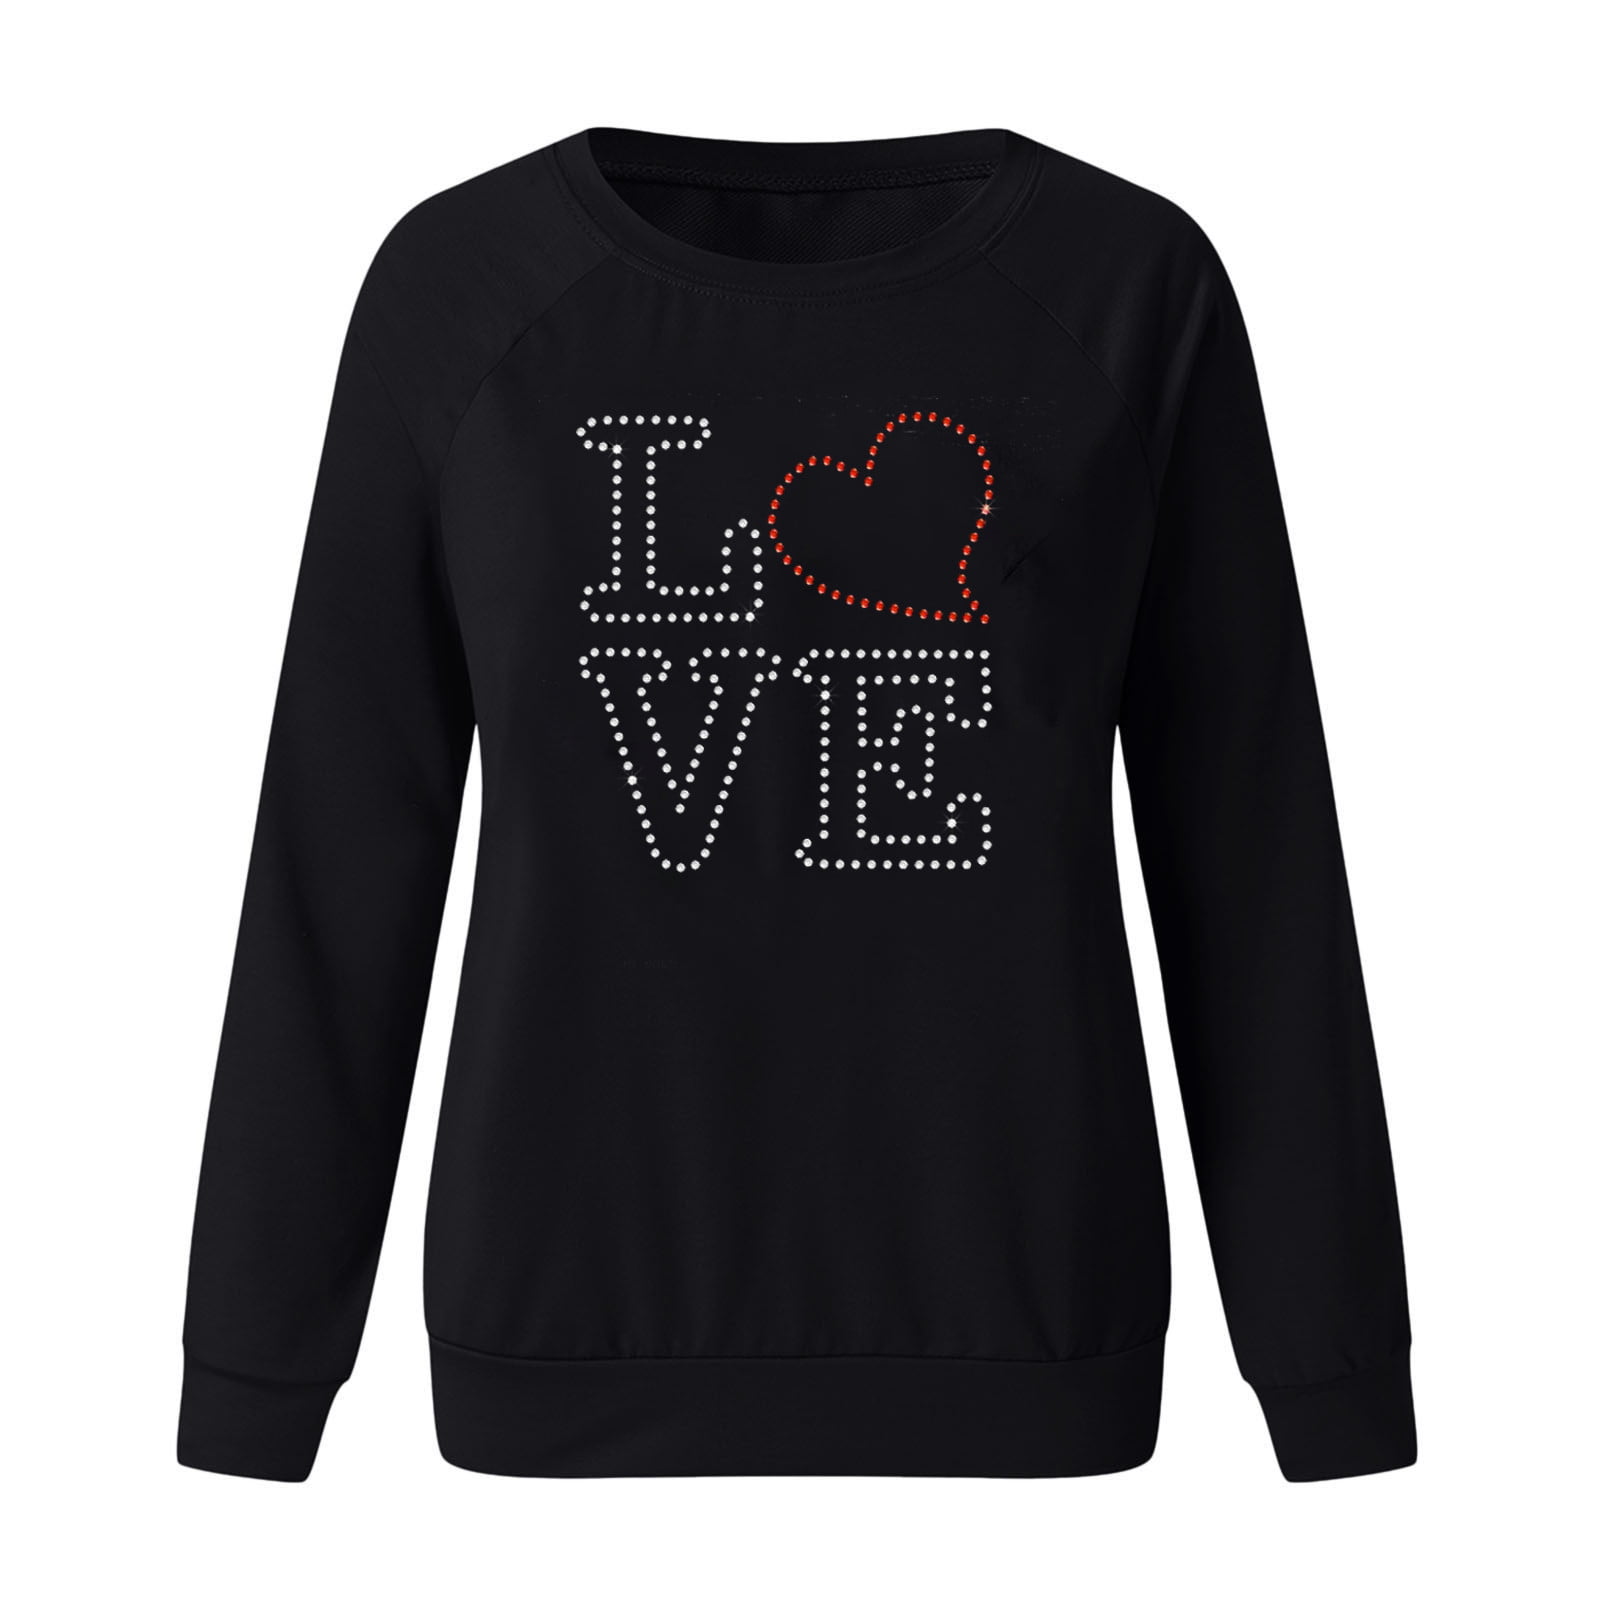 Clearance Womens Sequin Print Long Sleeve Sweatshirts Fashion Raglan  Crewneck Tops Valentine's Day Heart Shirts  Clearance Items Outlet 90